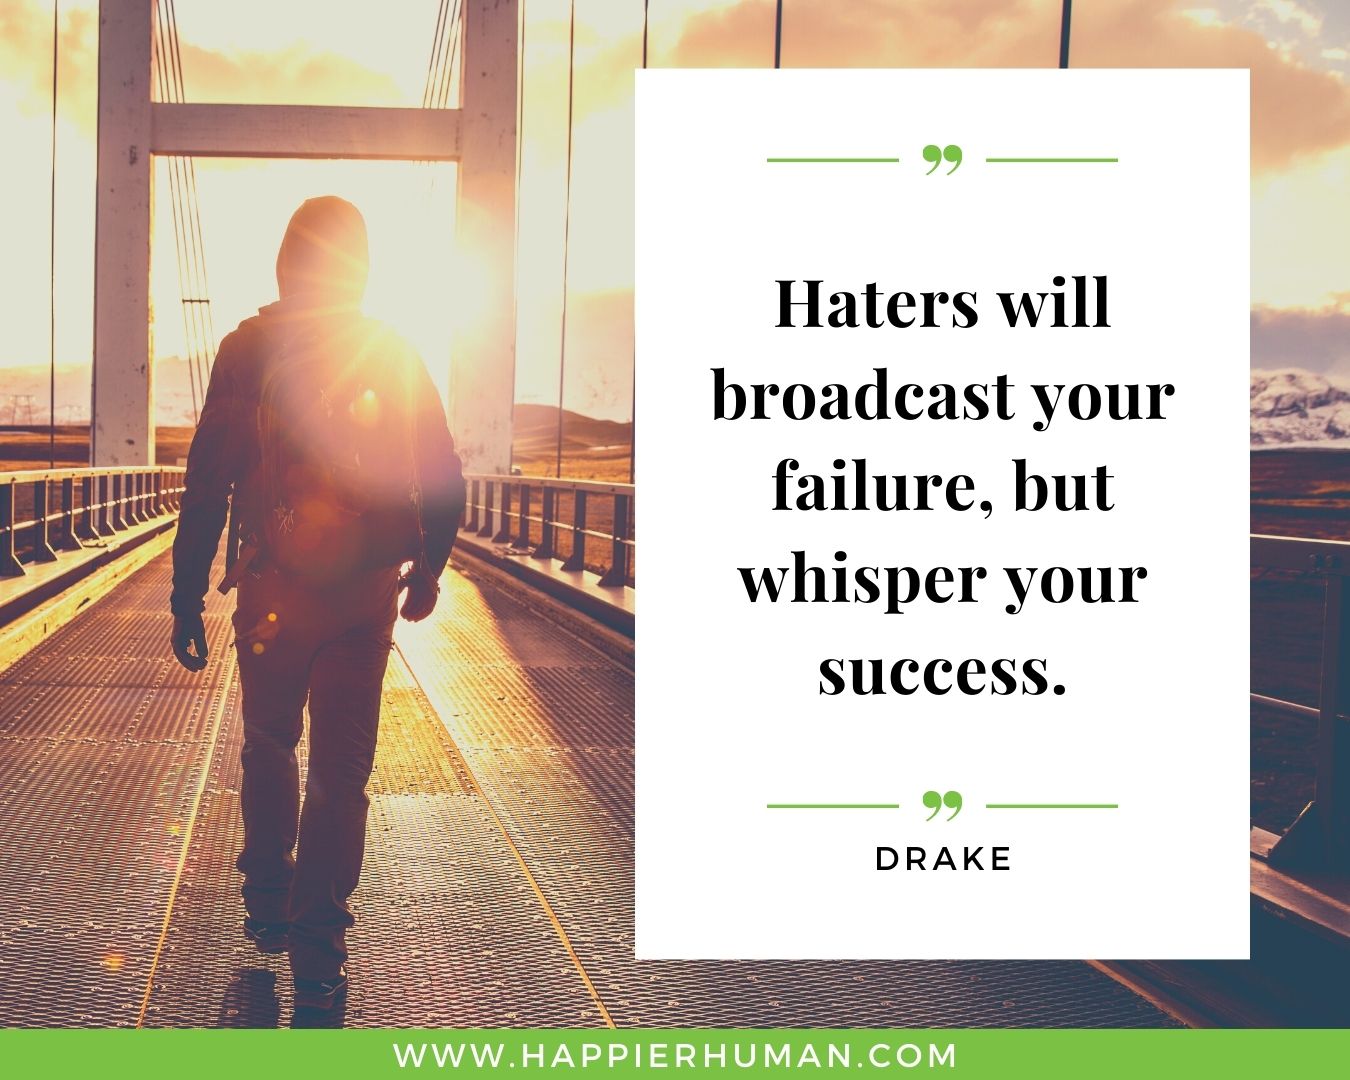 Haters Quotes - “Haters will broadcast your failure, but whisper your success.” - Drake